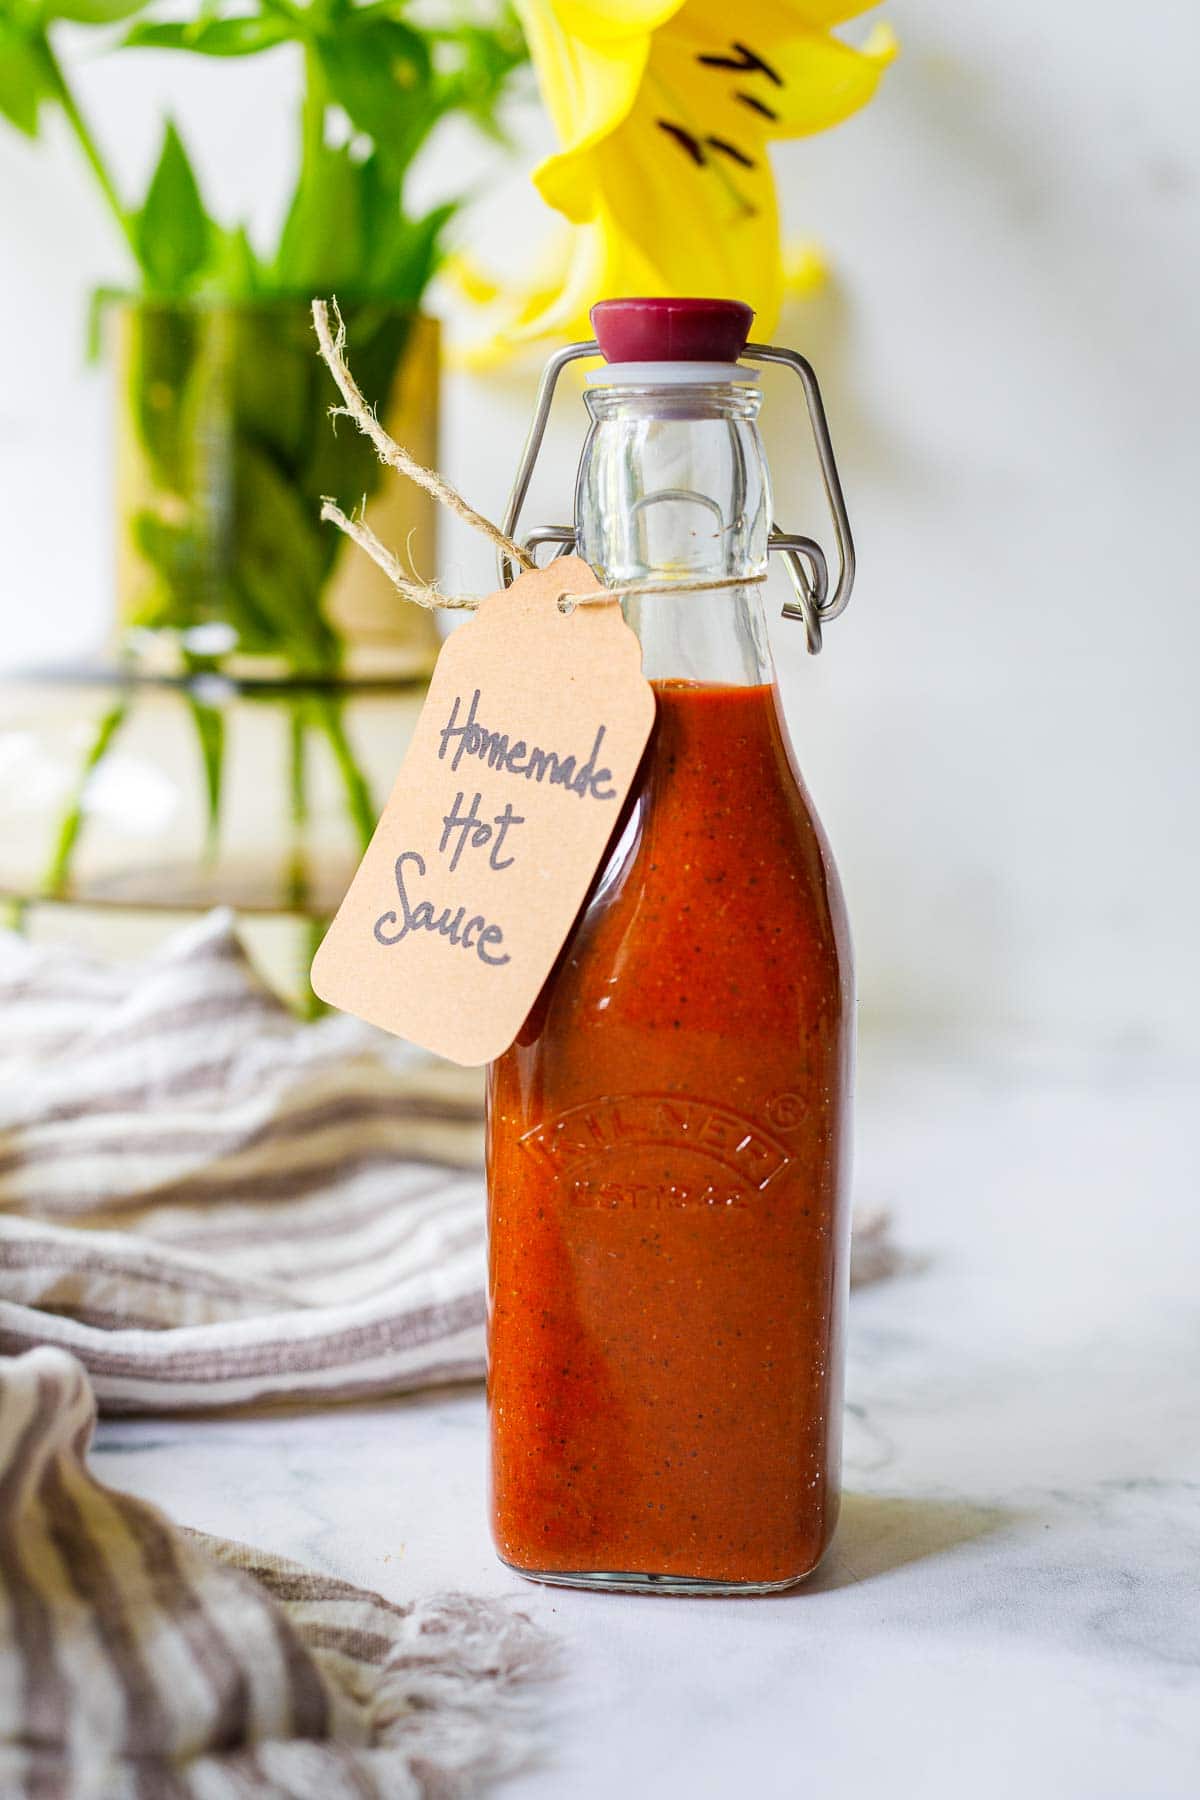 If you're a fan of Cholula or Tapatio hot sauce, you'll love this homemade version that can be whipped up in just 5 minutes! Using simple ingredients you probably already have on hand, this 5-minute Hot Sauce recipe helps you create the flavor of your favorite hot sauce brand without having to run to the store.